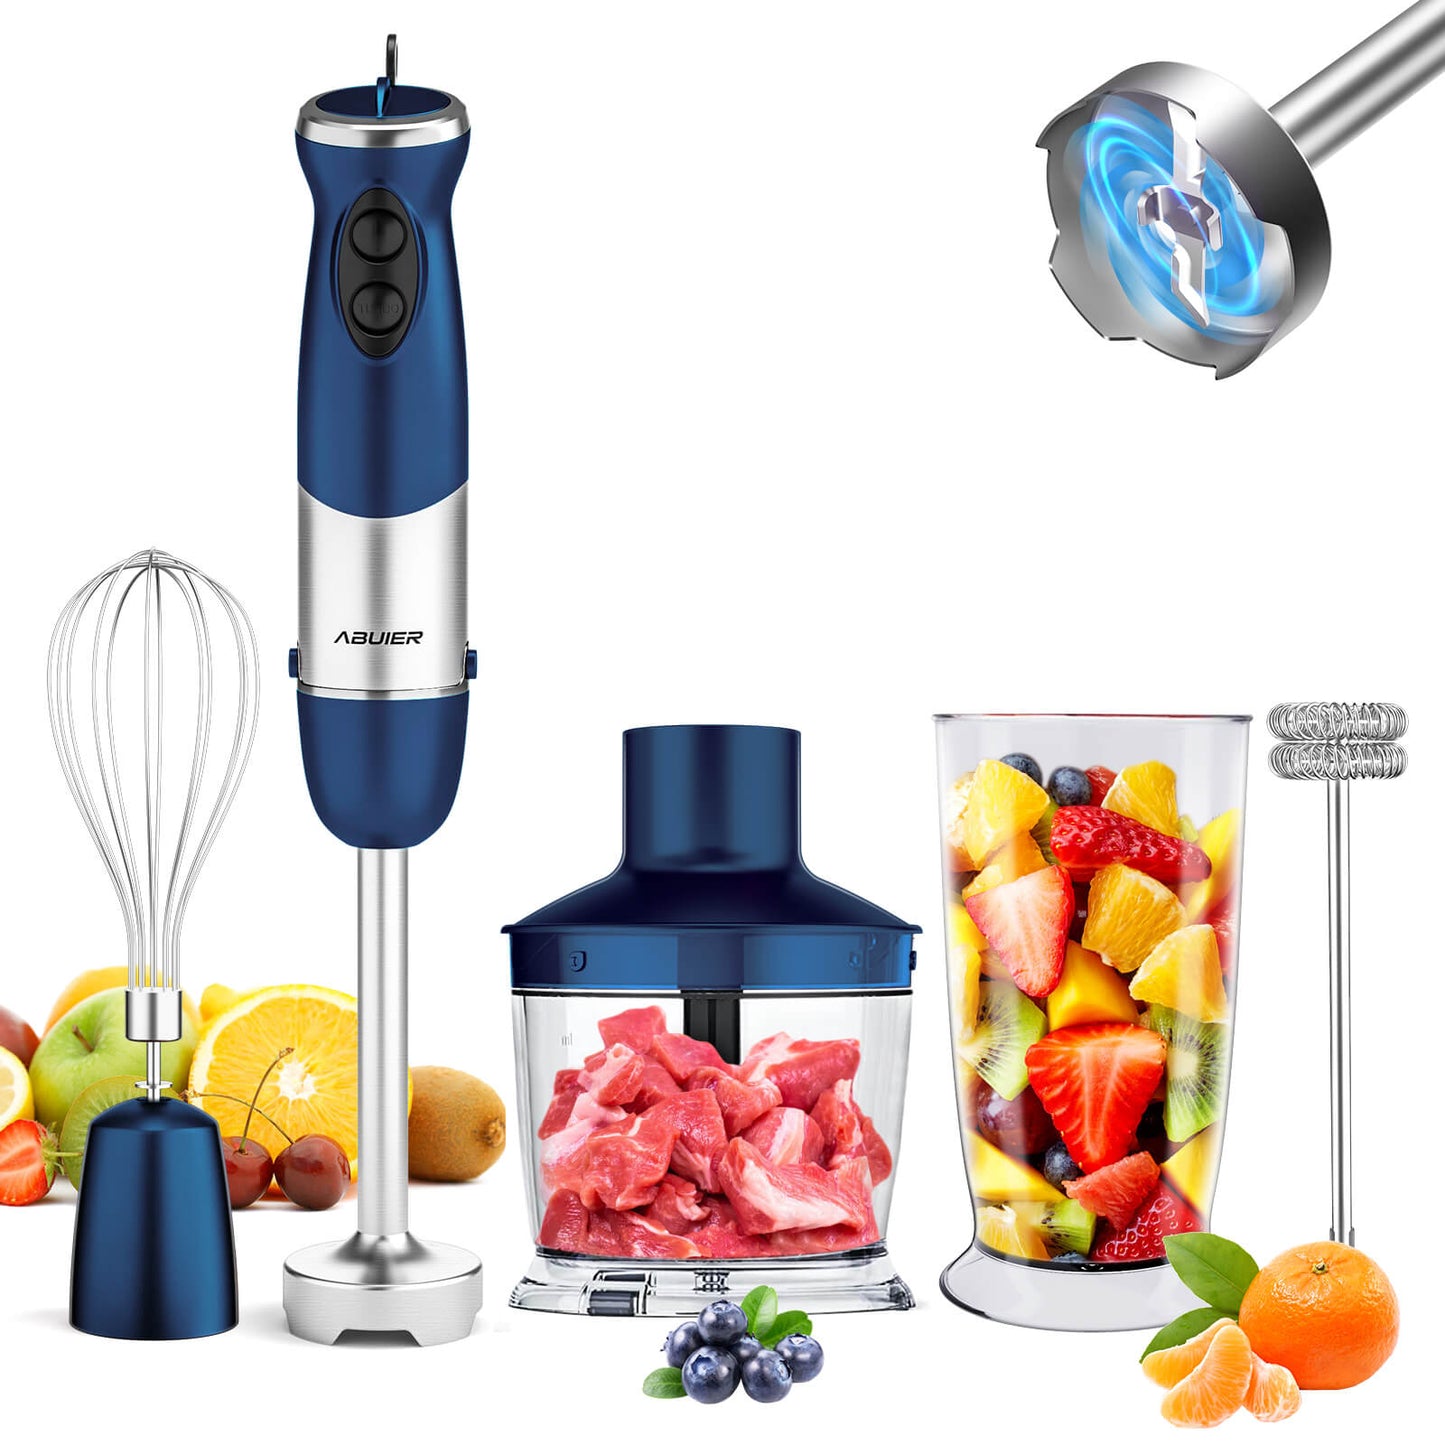 Lefree Small Blender Food Processor Combo Mixer Grinder for Kitchen 2 in 1